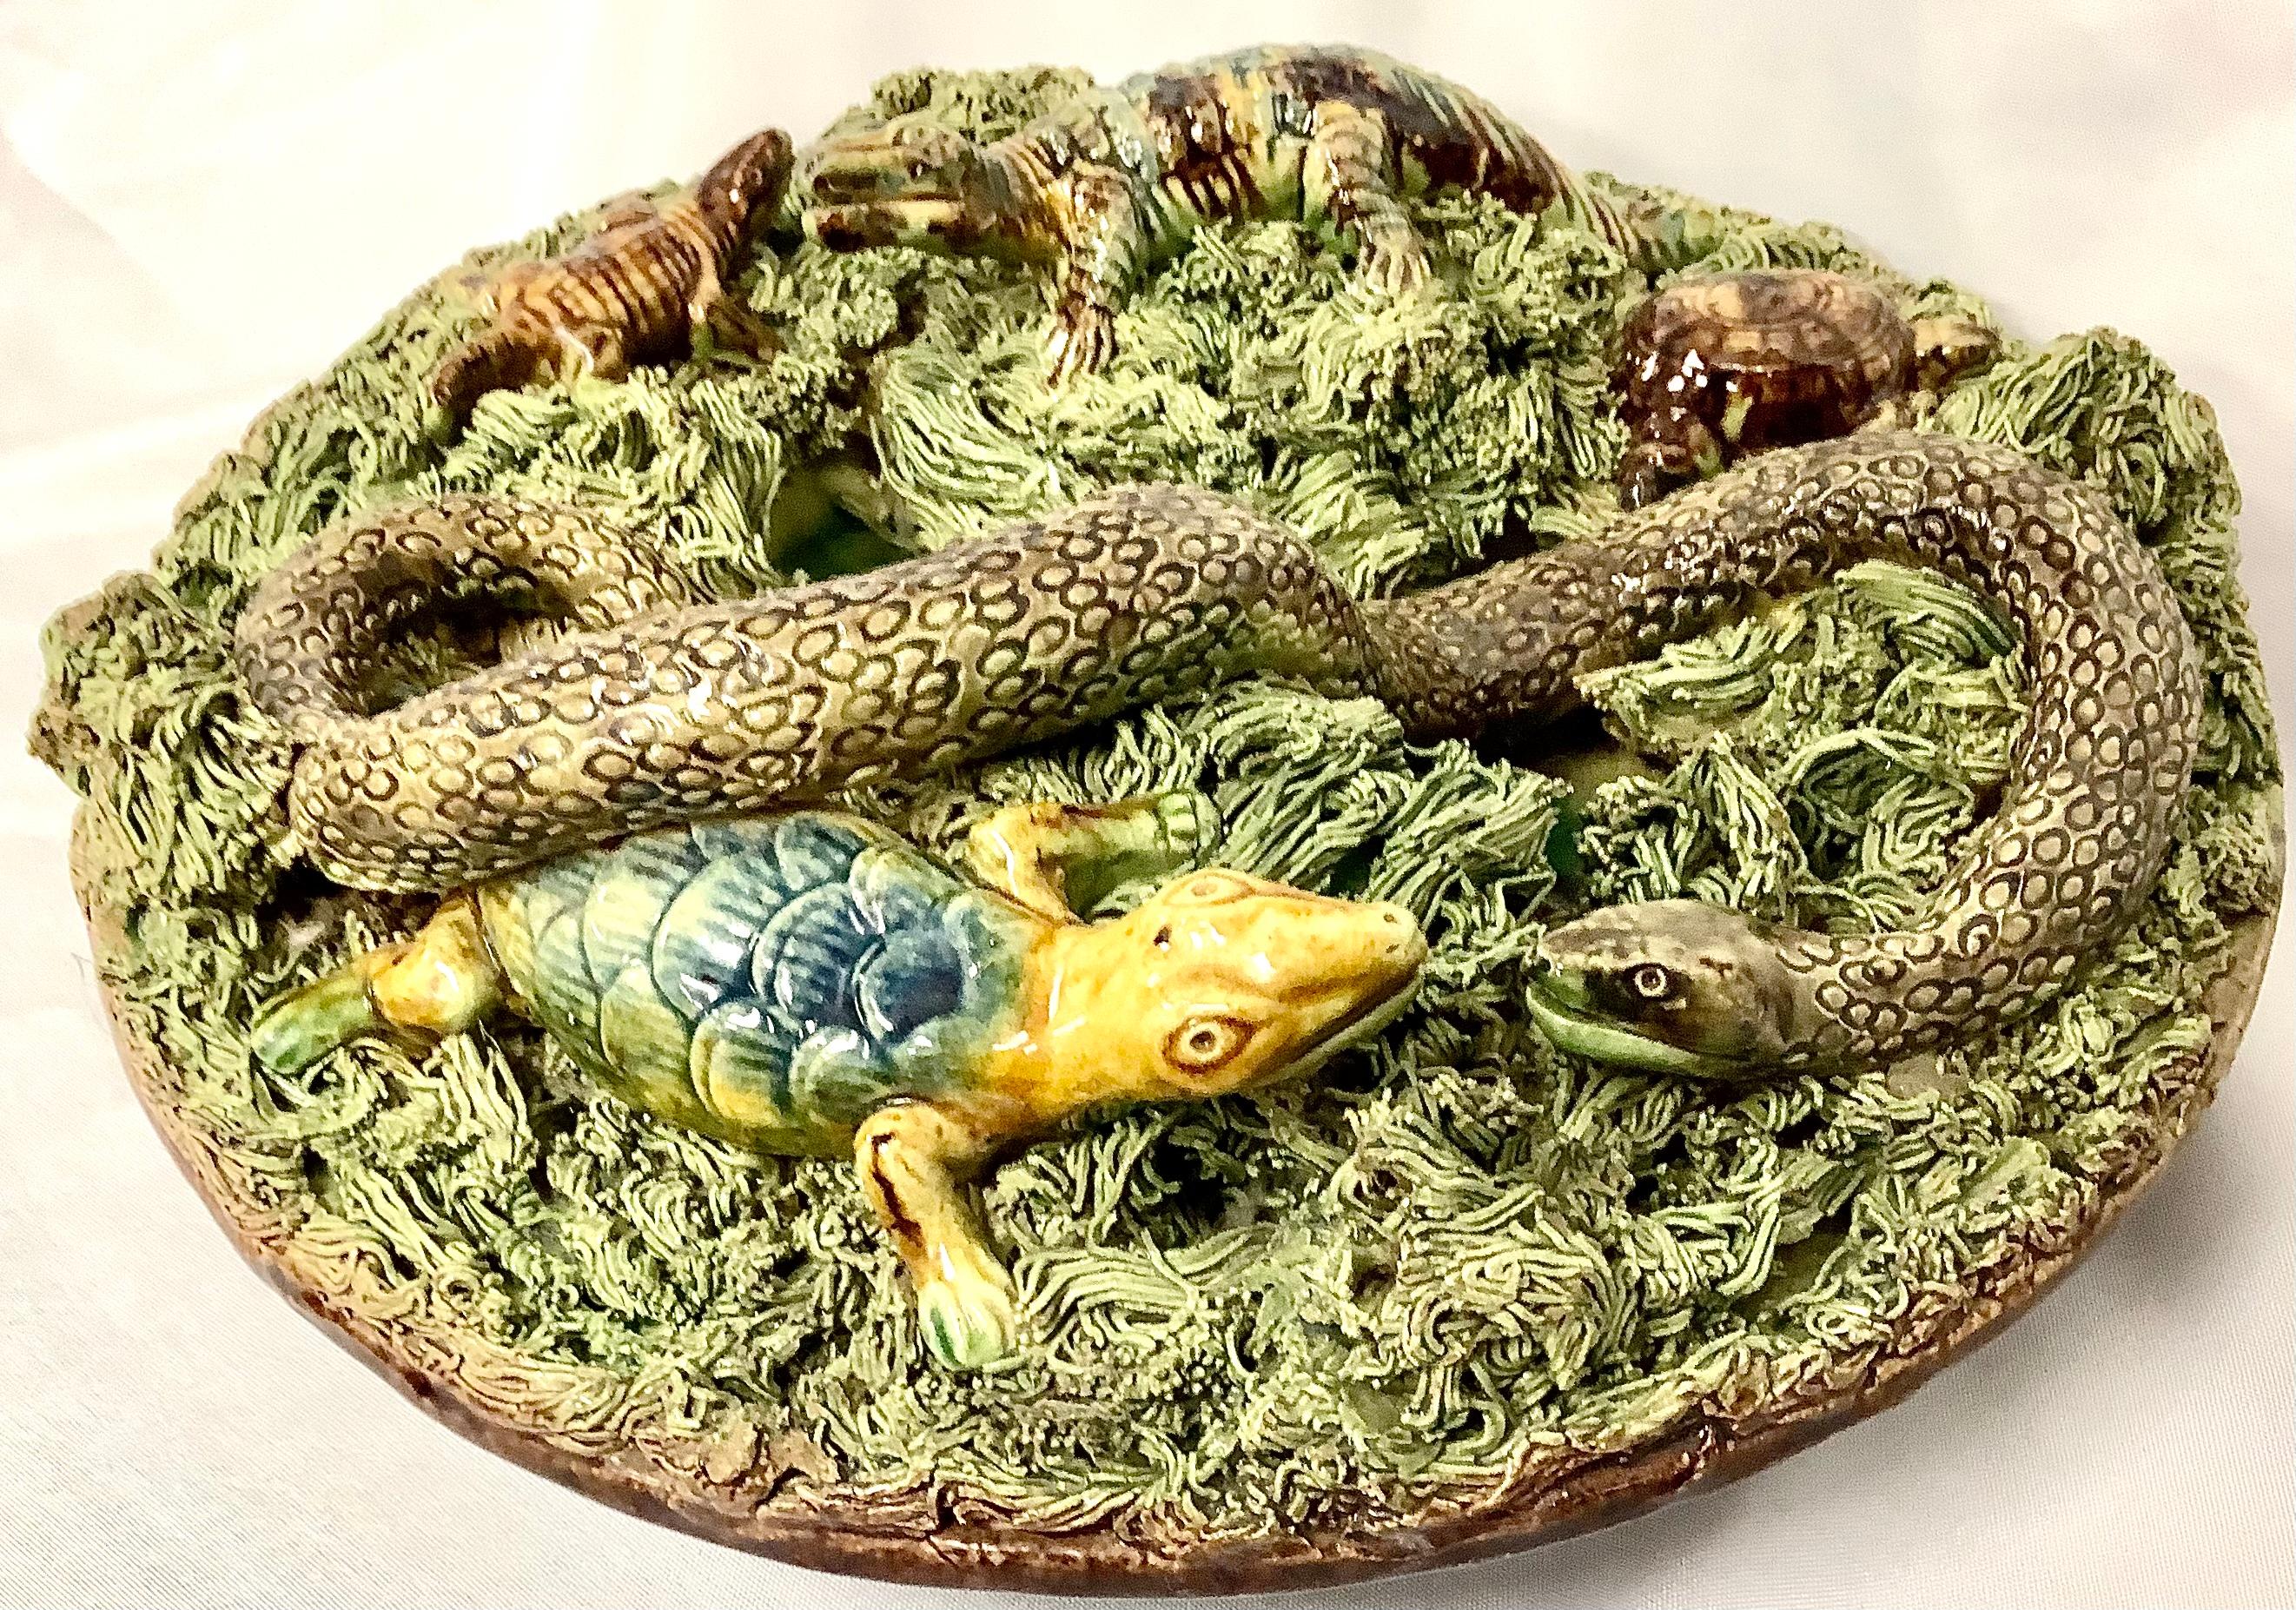 19 Century Portuguese Palissy plate with large snake and multiple crocodiles, one turtle all nesting on mossy tuft. Large number 6 is embossed on back. Colors are sage green and brown.